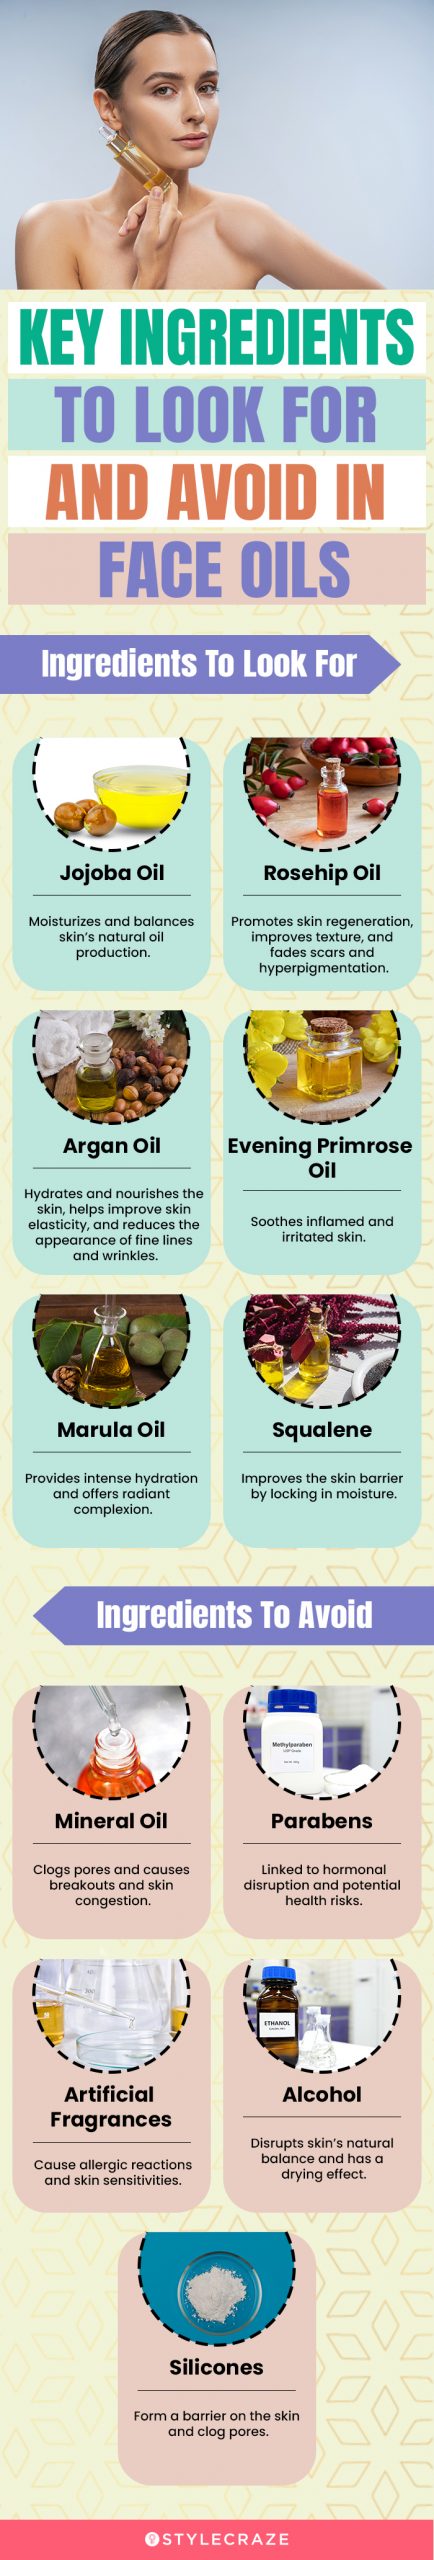 Key Ingredients To Look For And Avoid In Face Oils (infographic)